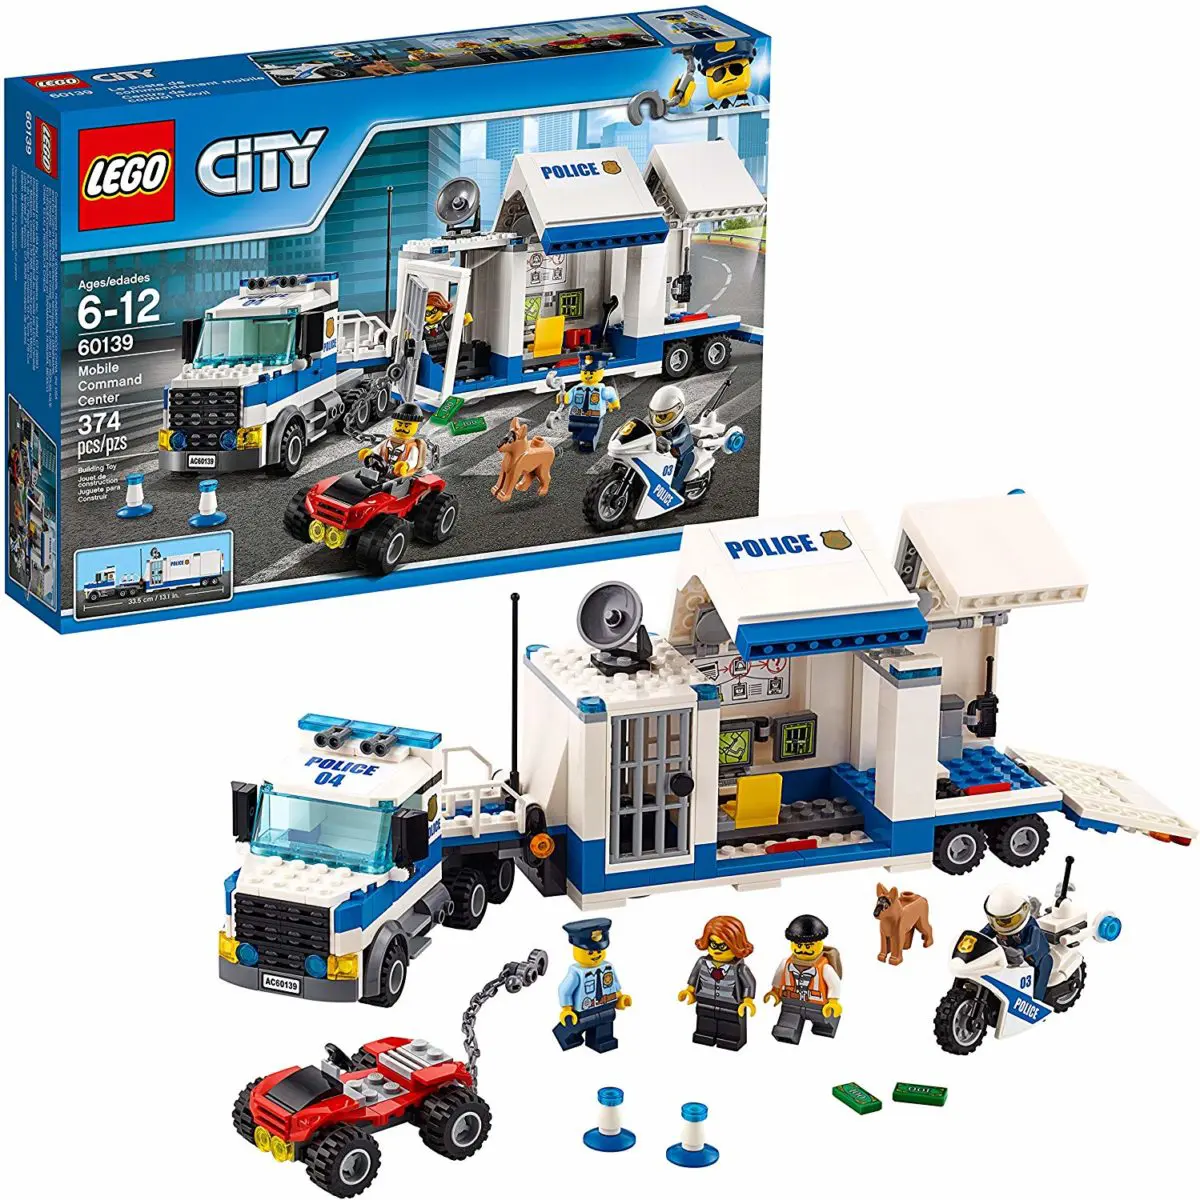 LEGO City Police Mobile Command Center Truck - Top Toys and Gifts for Six Year Old Boys 1